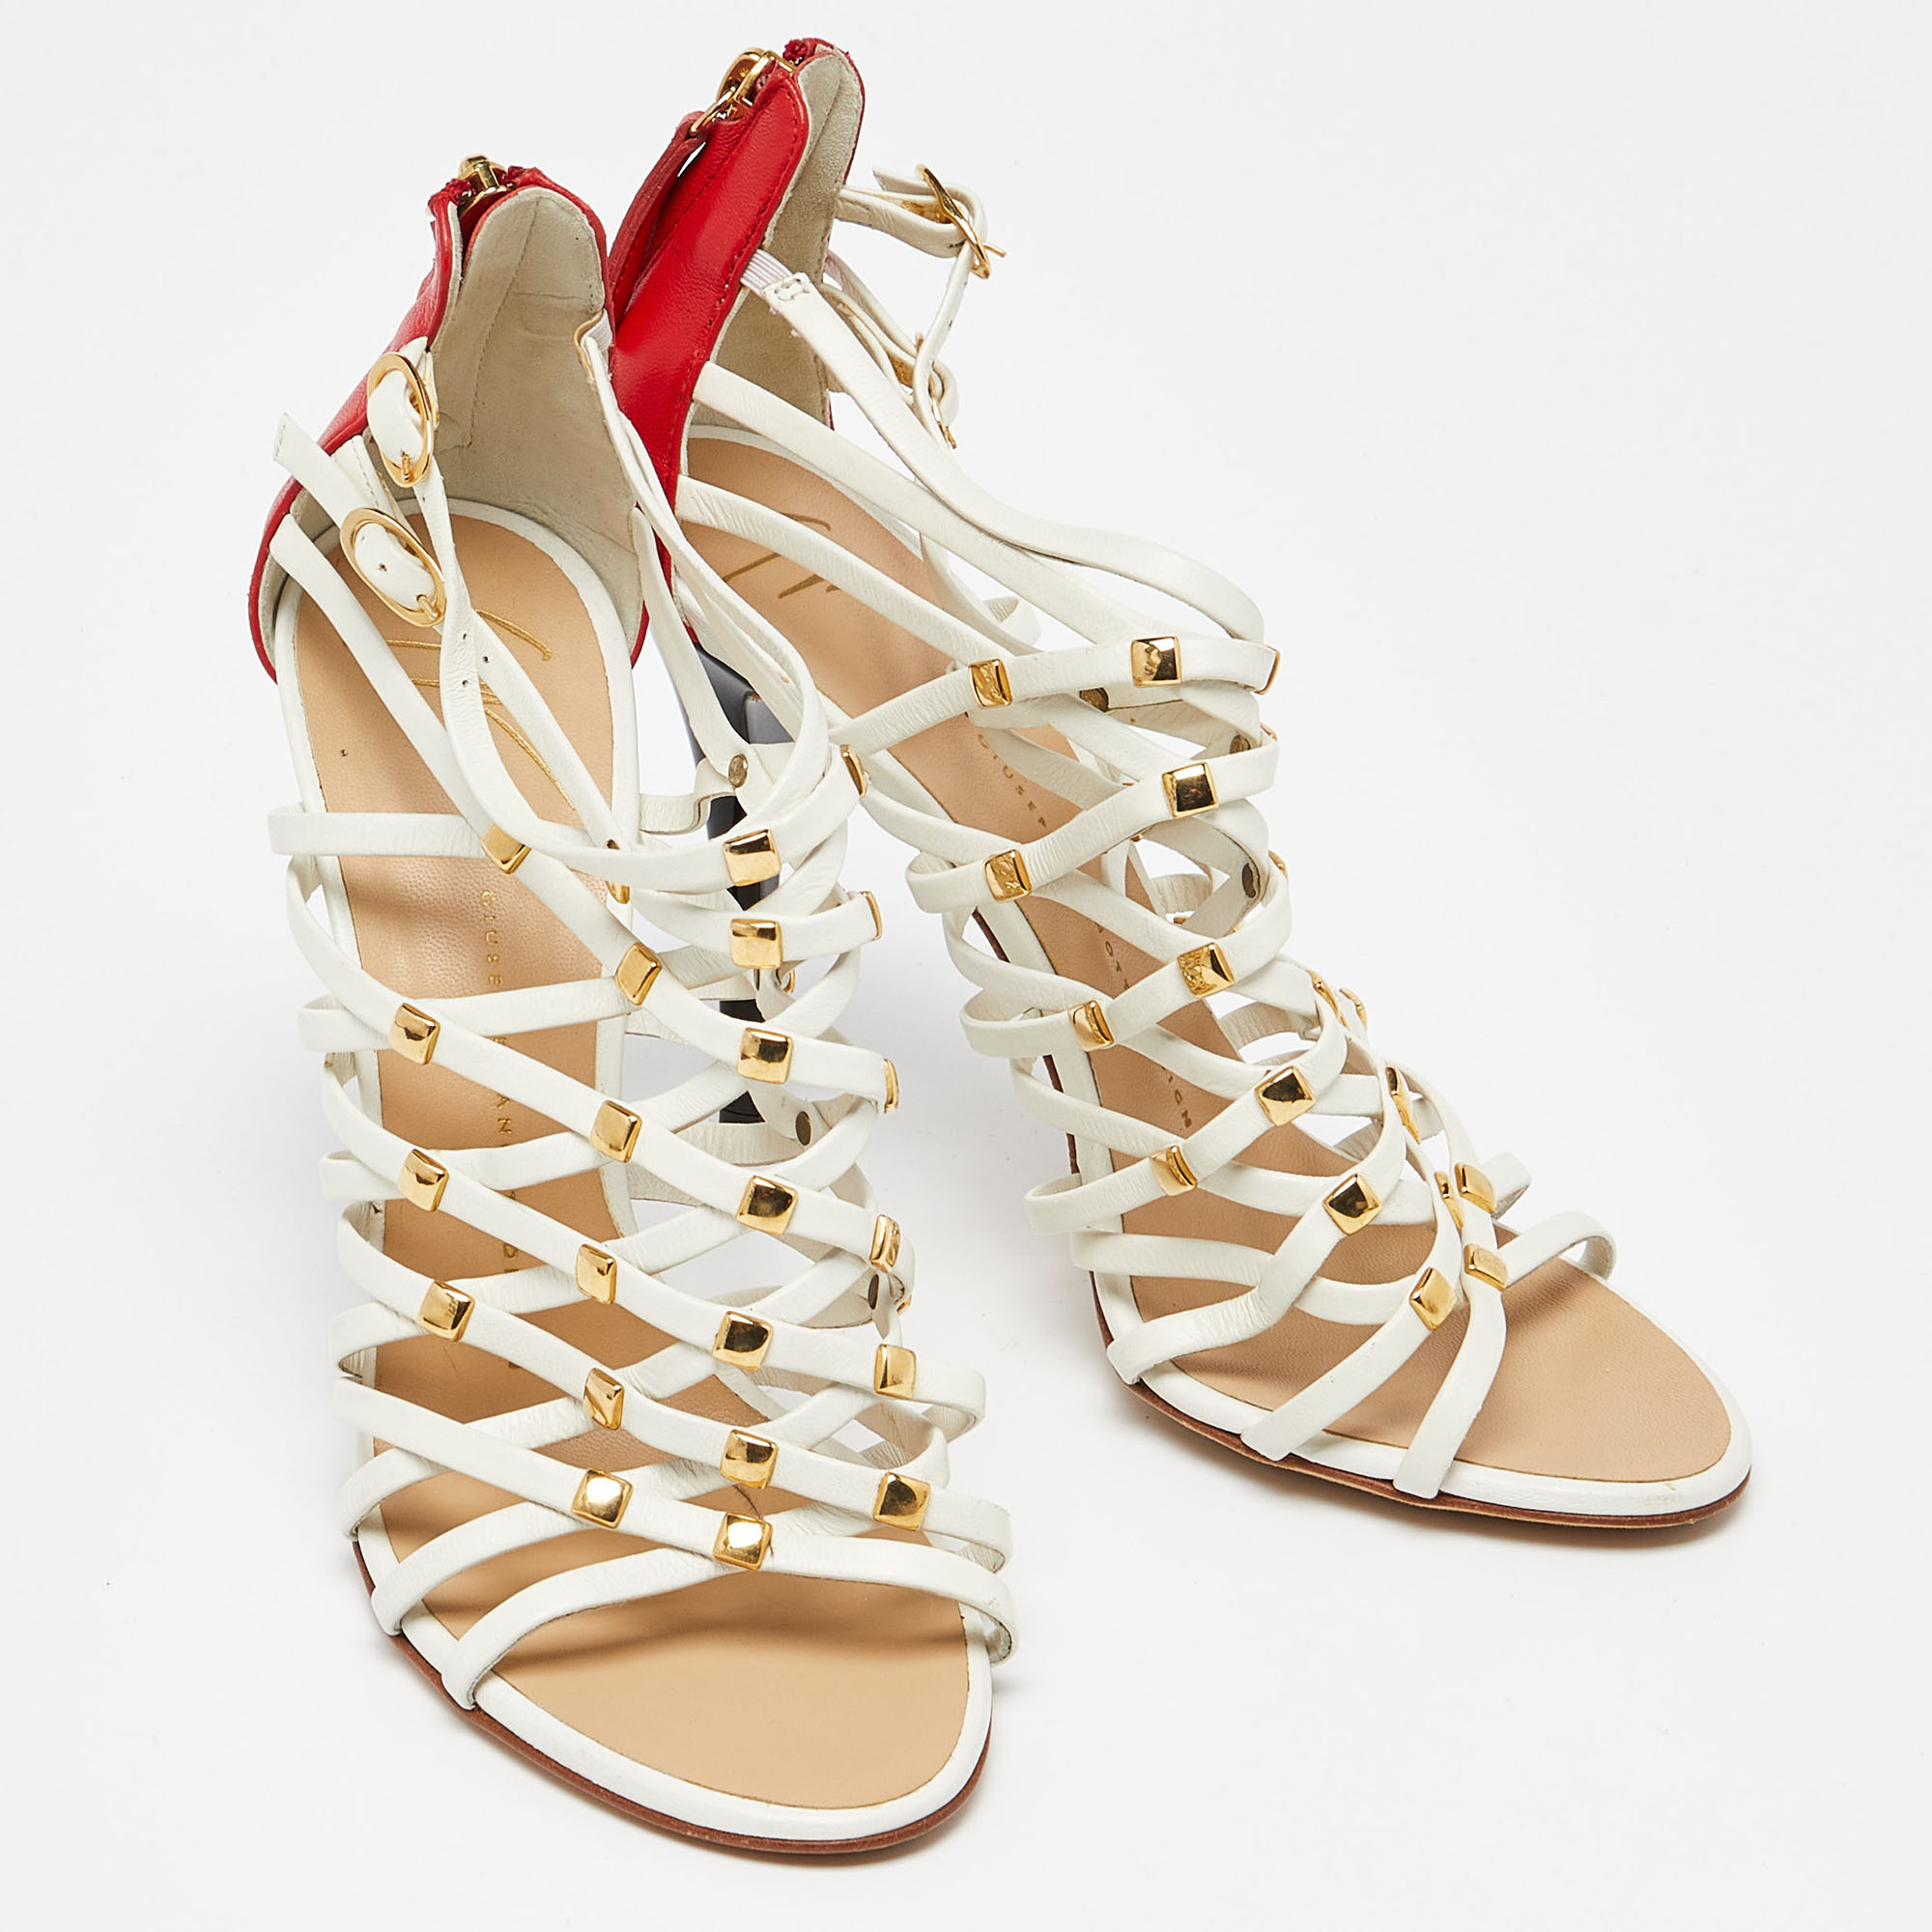 Giuseppe Zanotti White/Red Leather Embellished Strappy Sandals Size 38.5